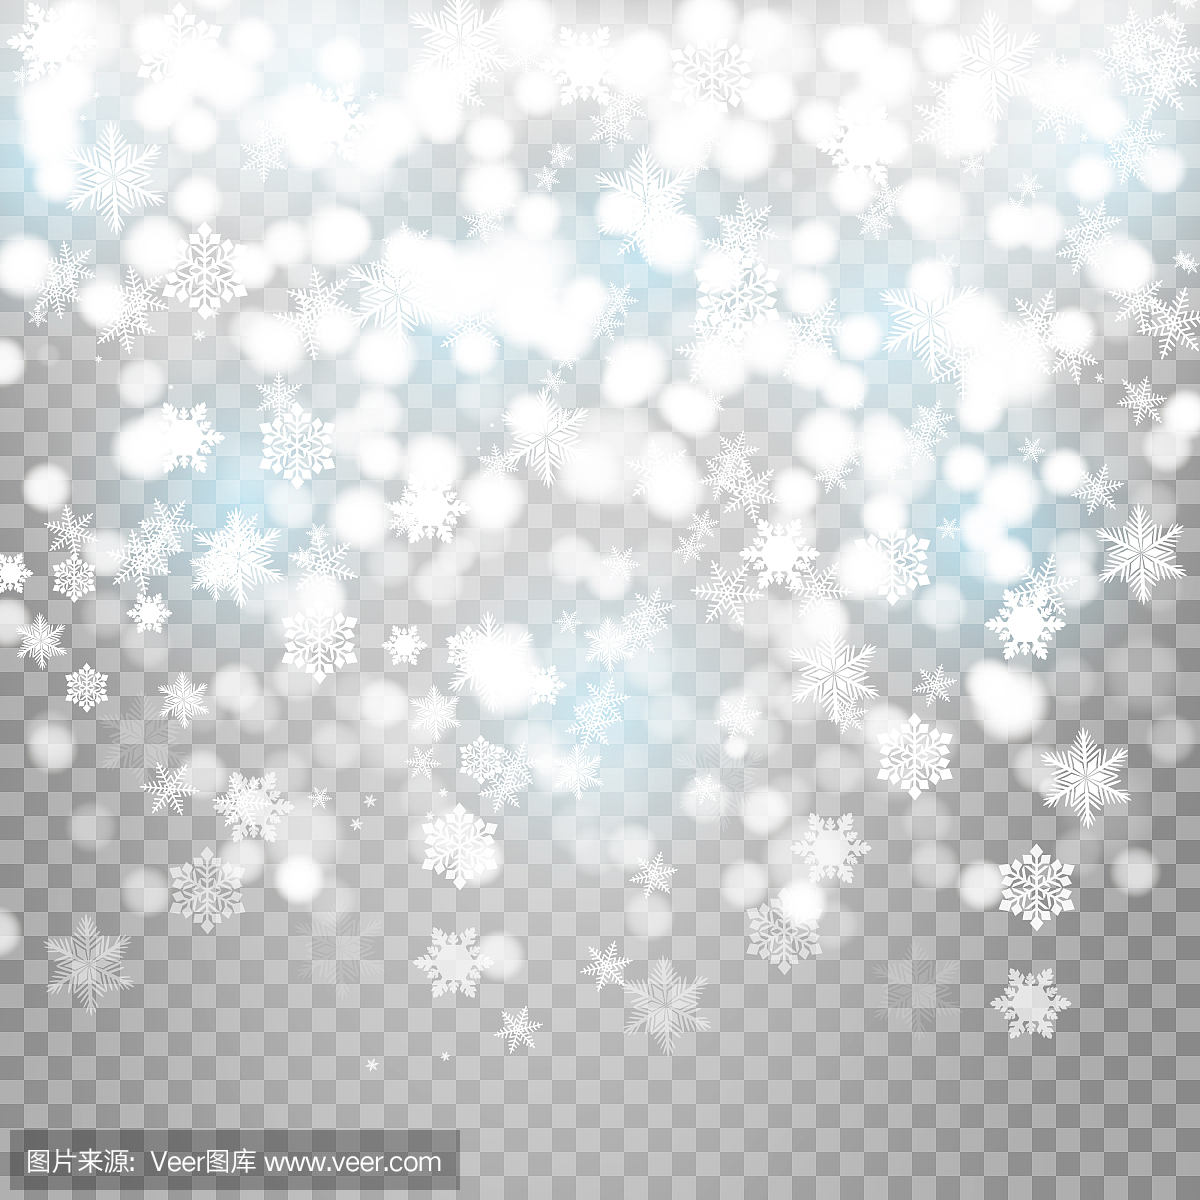 Vector falling snow effect isolated on transpare